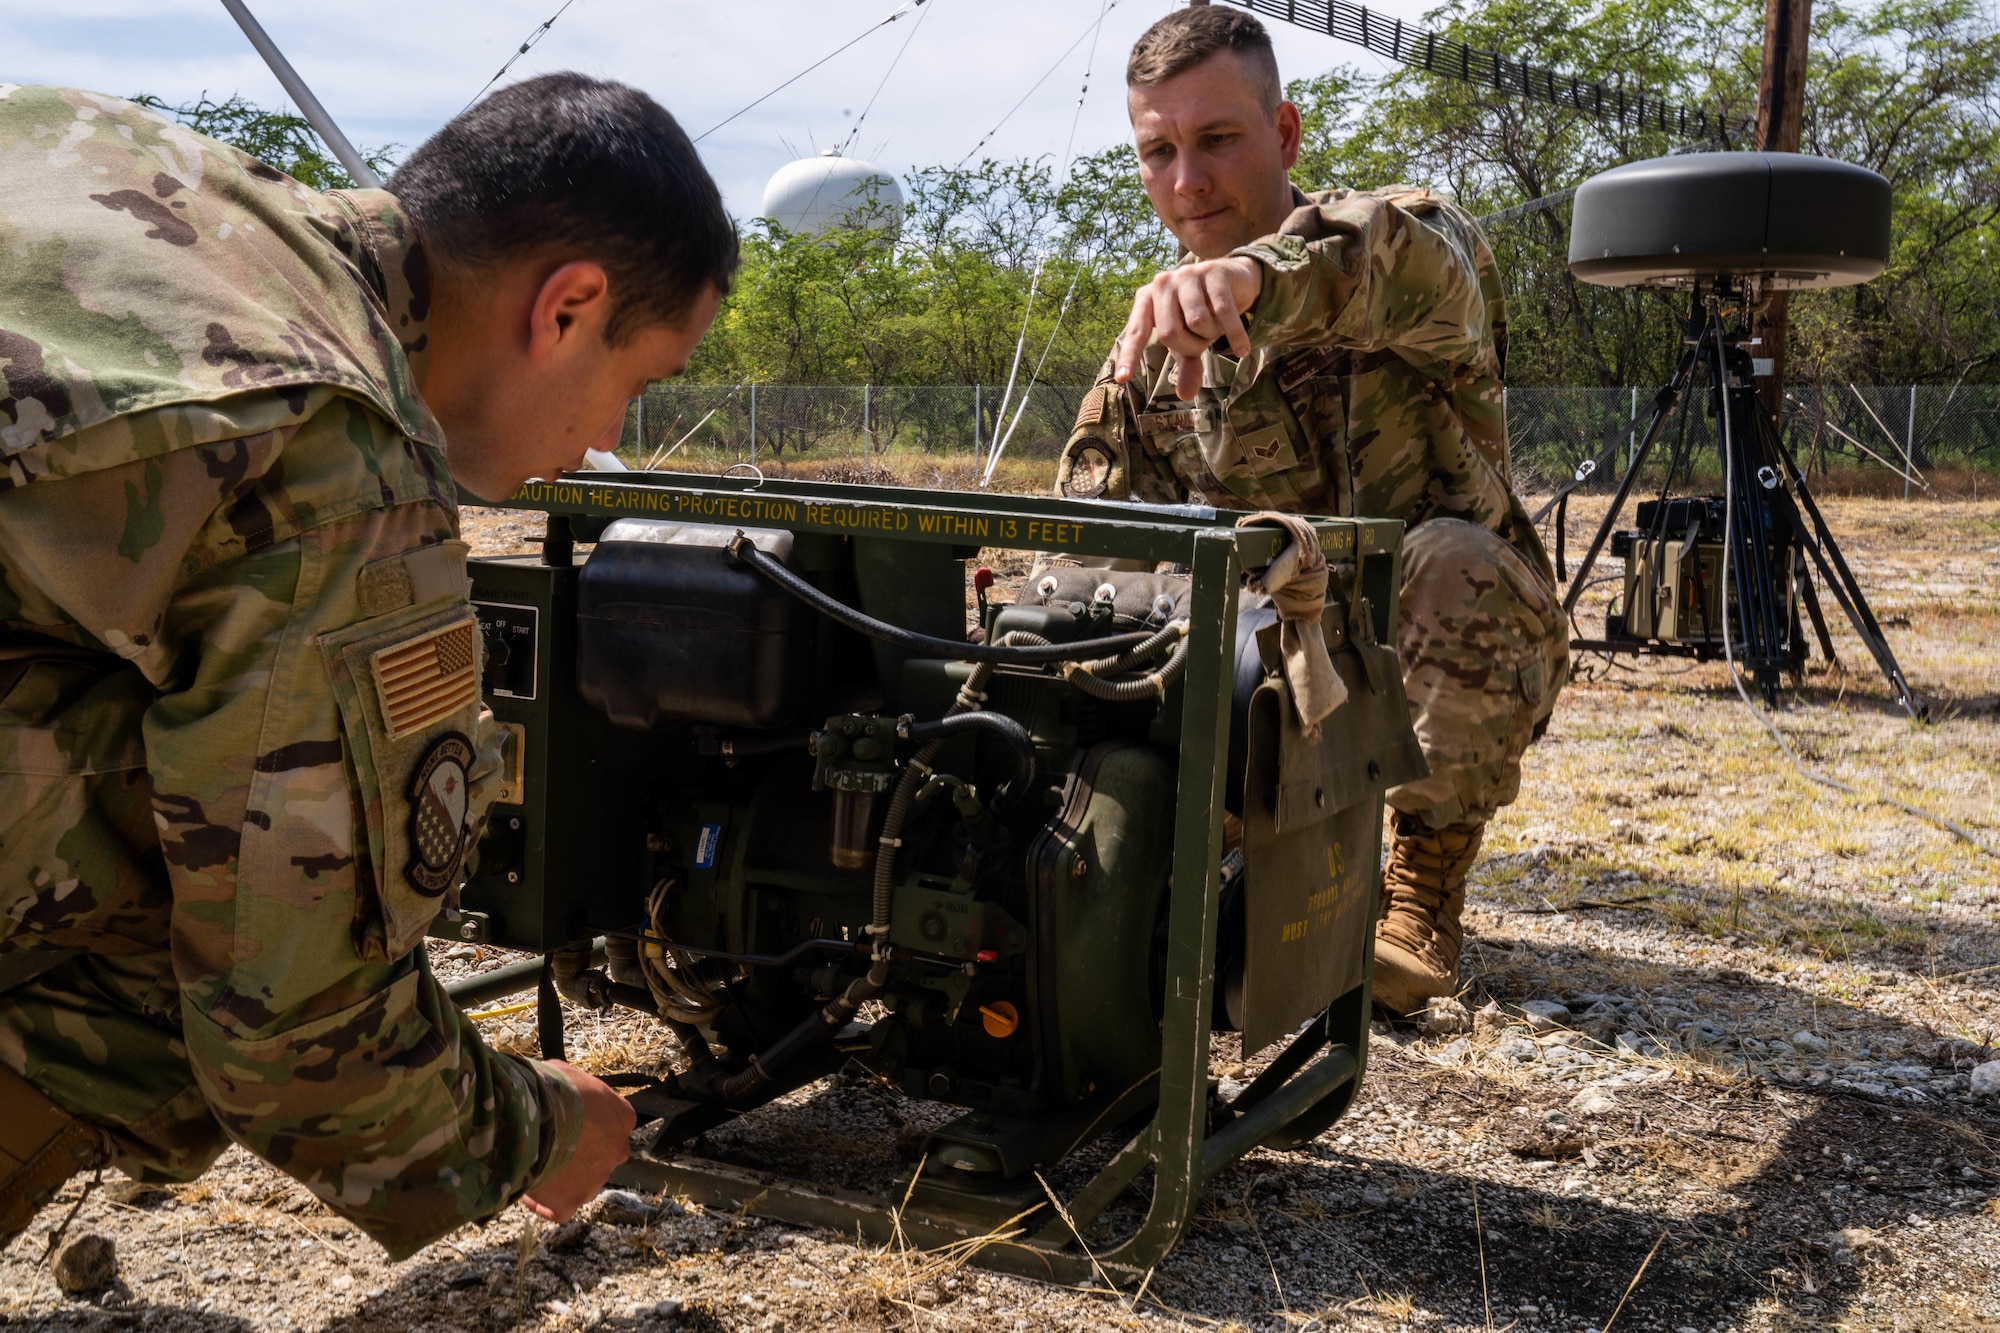 Senior Airman Troy Stanley, 15th Operation Support Squadron Radar, Airfield and Weather Systems Shop, starts the generator to run the Tactical Navigation System for a training exercise at Joint Base Pearl Harbor-Hickam, Hawaii, March 15, 2022. The TACAN is a radio air-navigation system that provides aircrew distance information as a guide to show their geographical location and is usually used by combat controllers in remote airfields. (U.S. Air Force photo by Airman 1st Class Makensie Cooper)